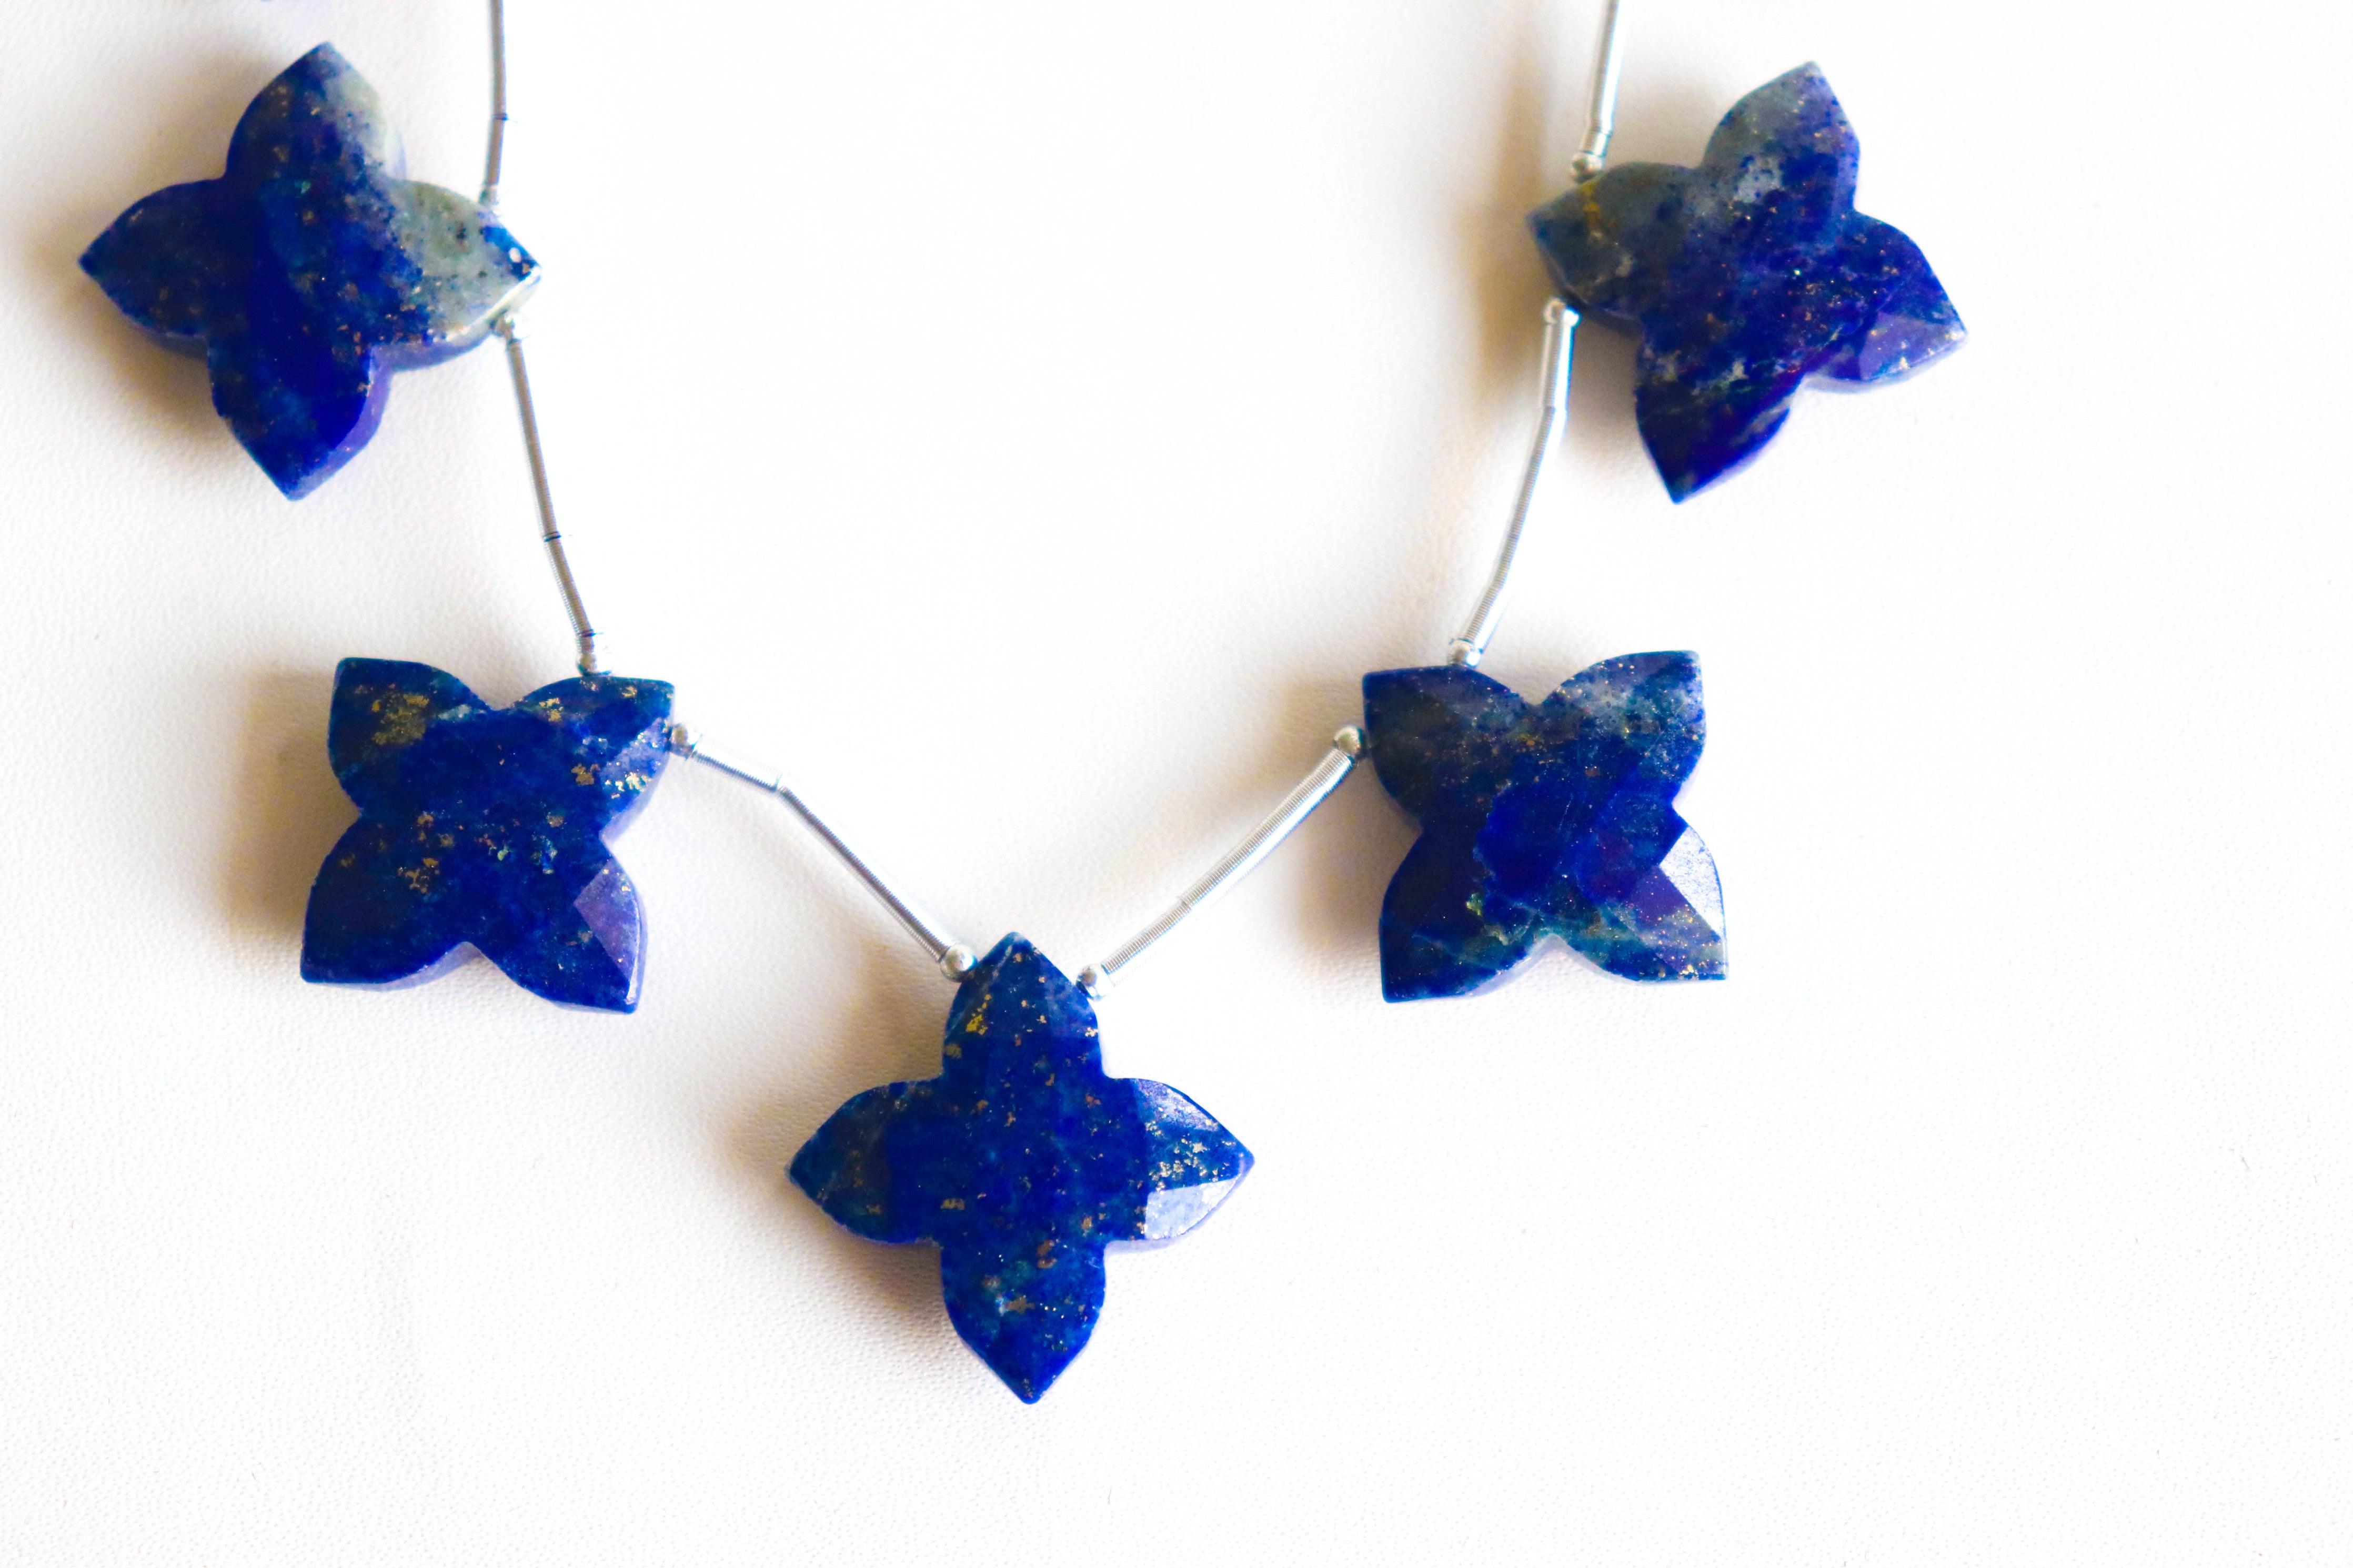 7 Pieces Lapis Lazuli Gemstone faceted Flower Shape Side drill beads Beadsforyourjewelry